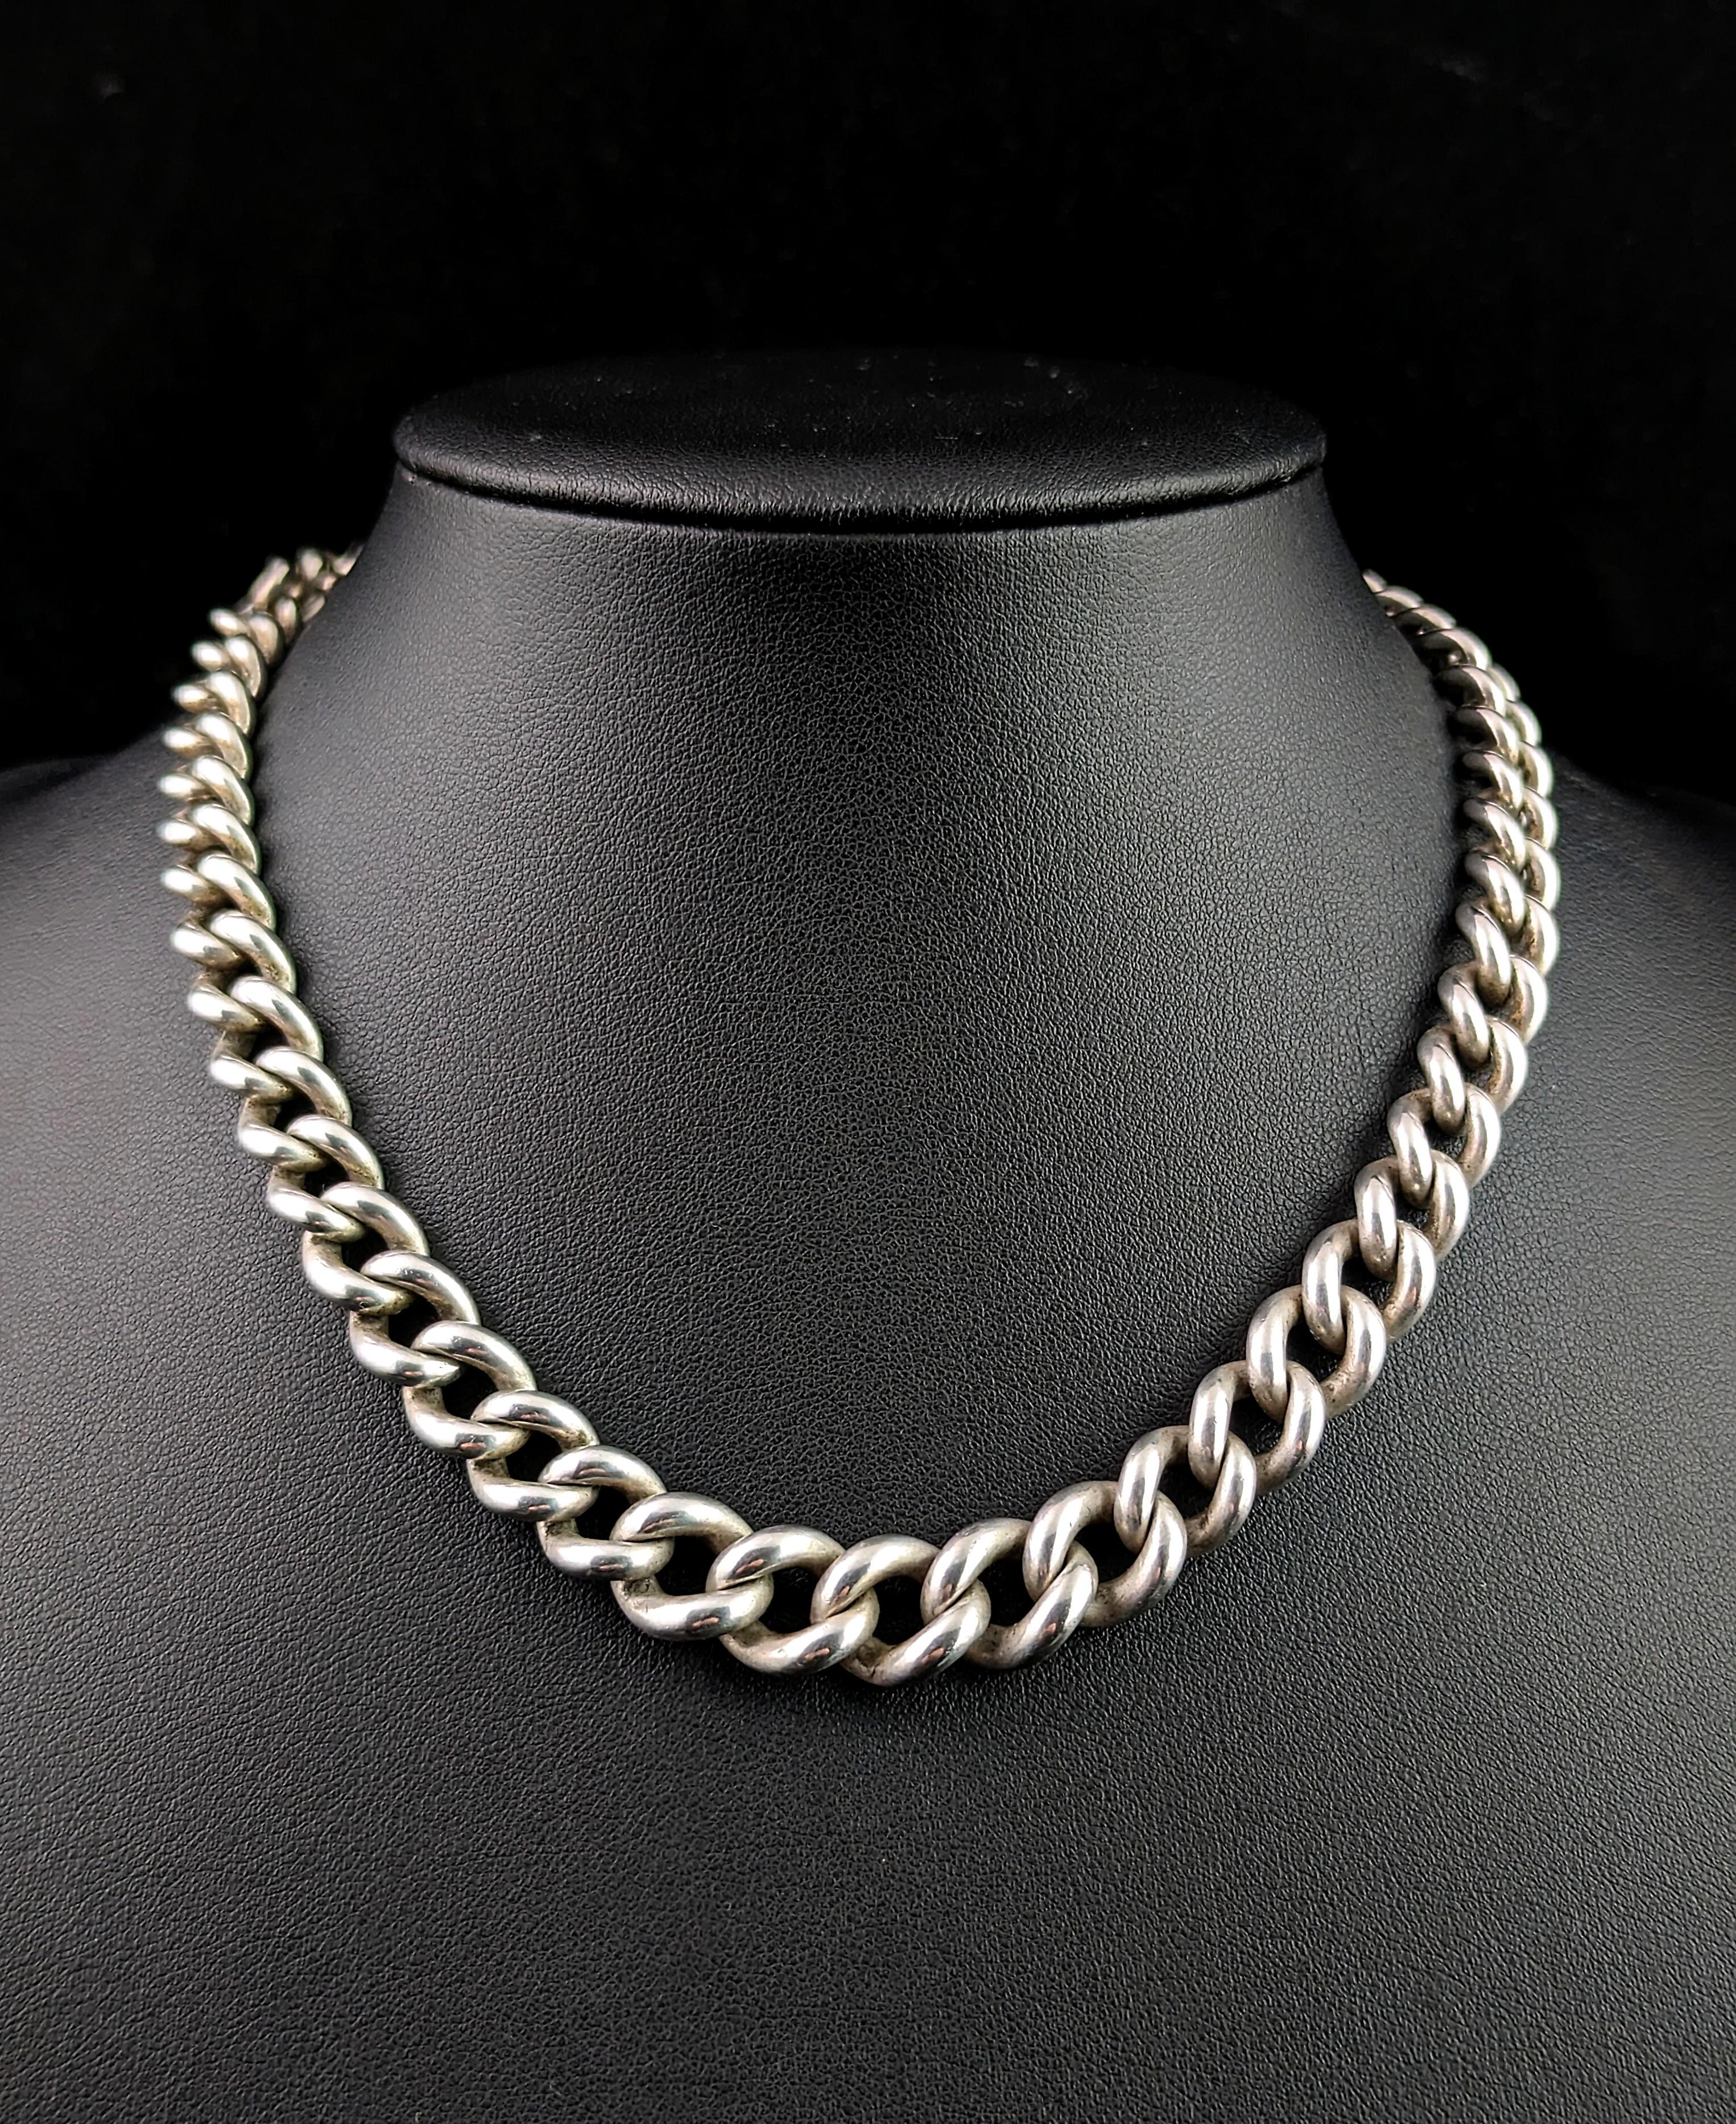 You can't help but fall in love with this handsome antique Albert chain.

It is a sterling silver chain with a chunky and heavy graduating curb link with a dog clip fastener to one end and a T bar and short chain length to the other.

Each link is